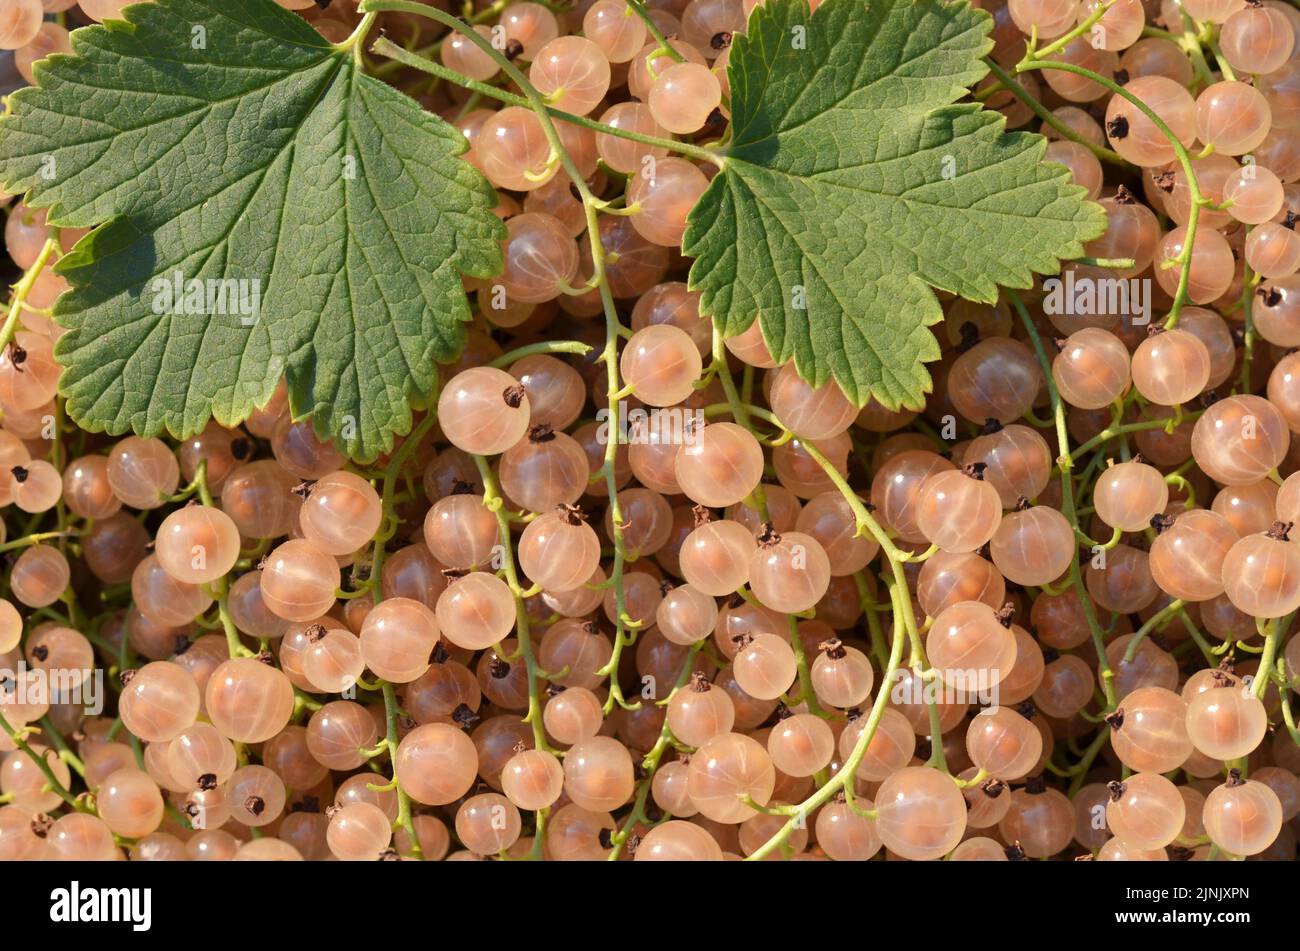 Ripe white currant berries on a full frame as a background. Healthy eating concept. Stock Photo